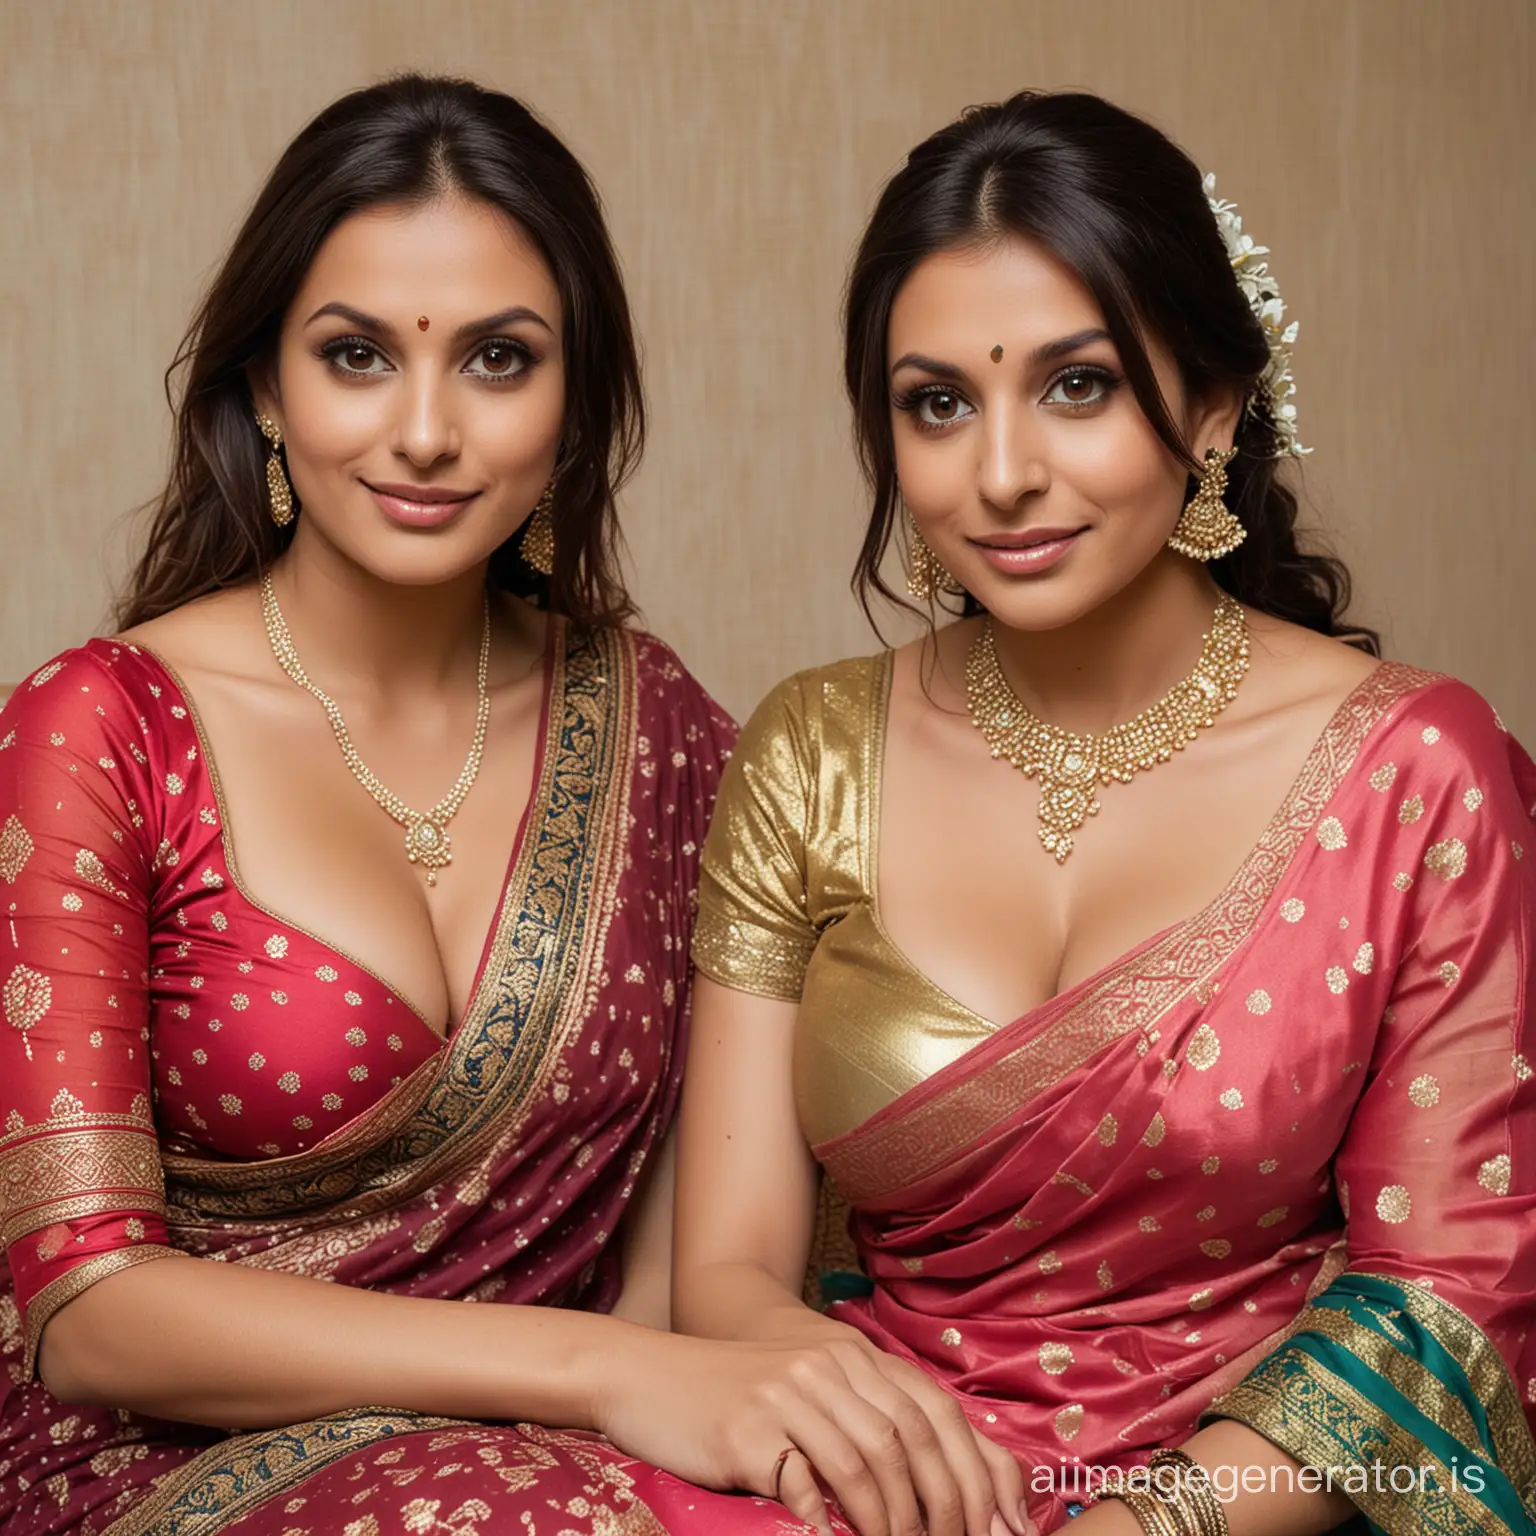 two beautiful European Brunettes with large boobs at an Indian wedding wearing extremely deep cleavage blouse and a Saree sitting together and looking at you